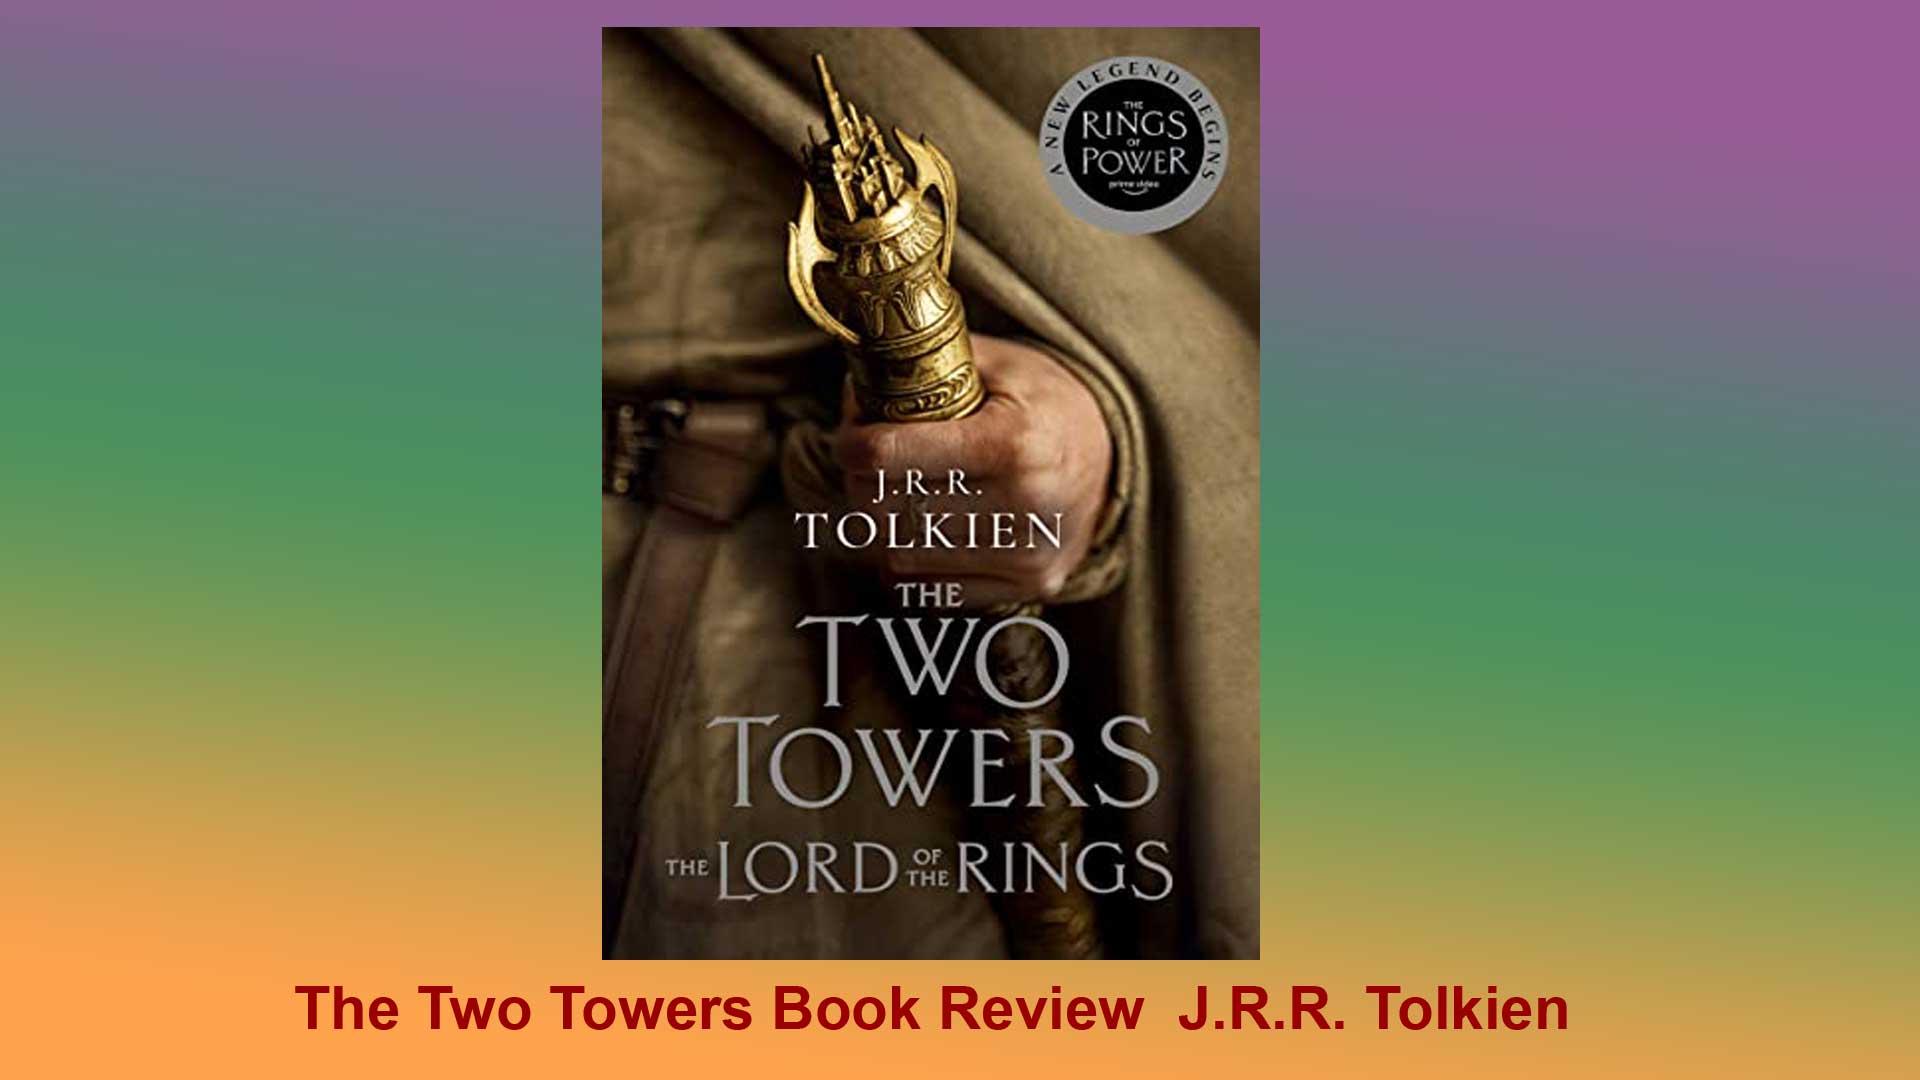 The Two Towers Book Review Cover Image